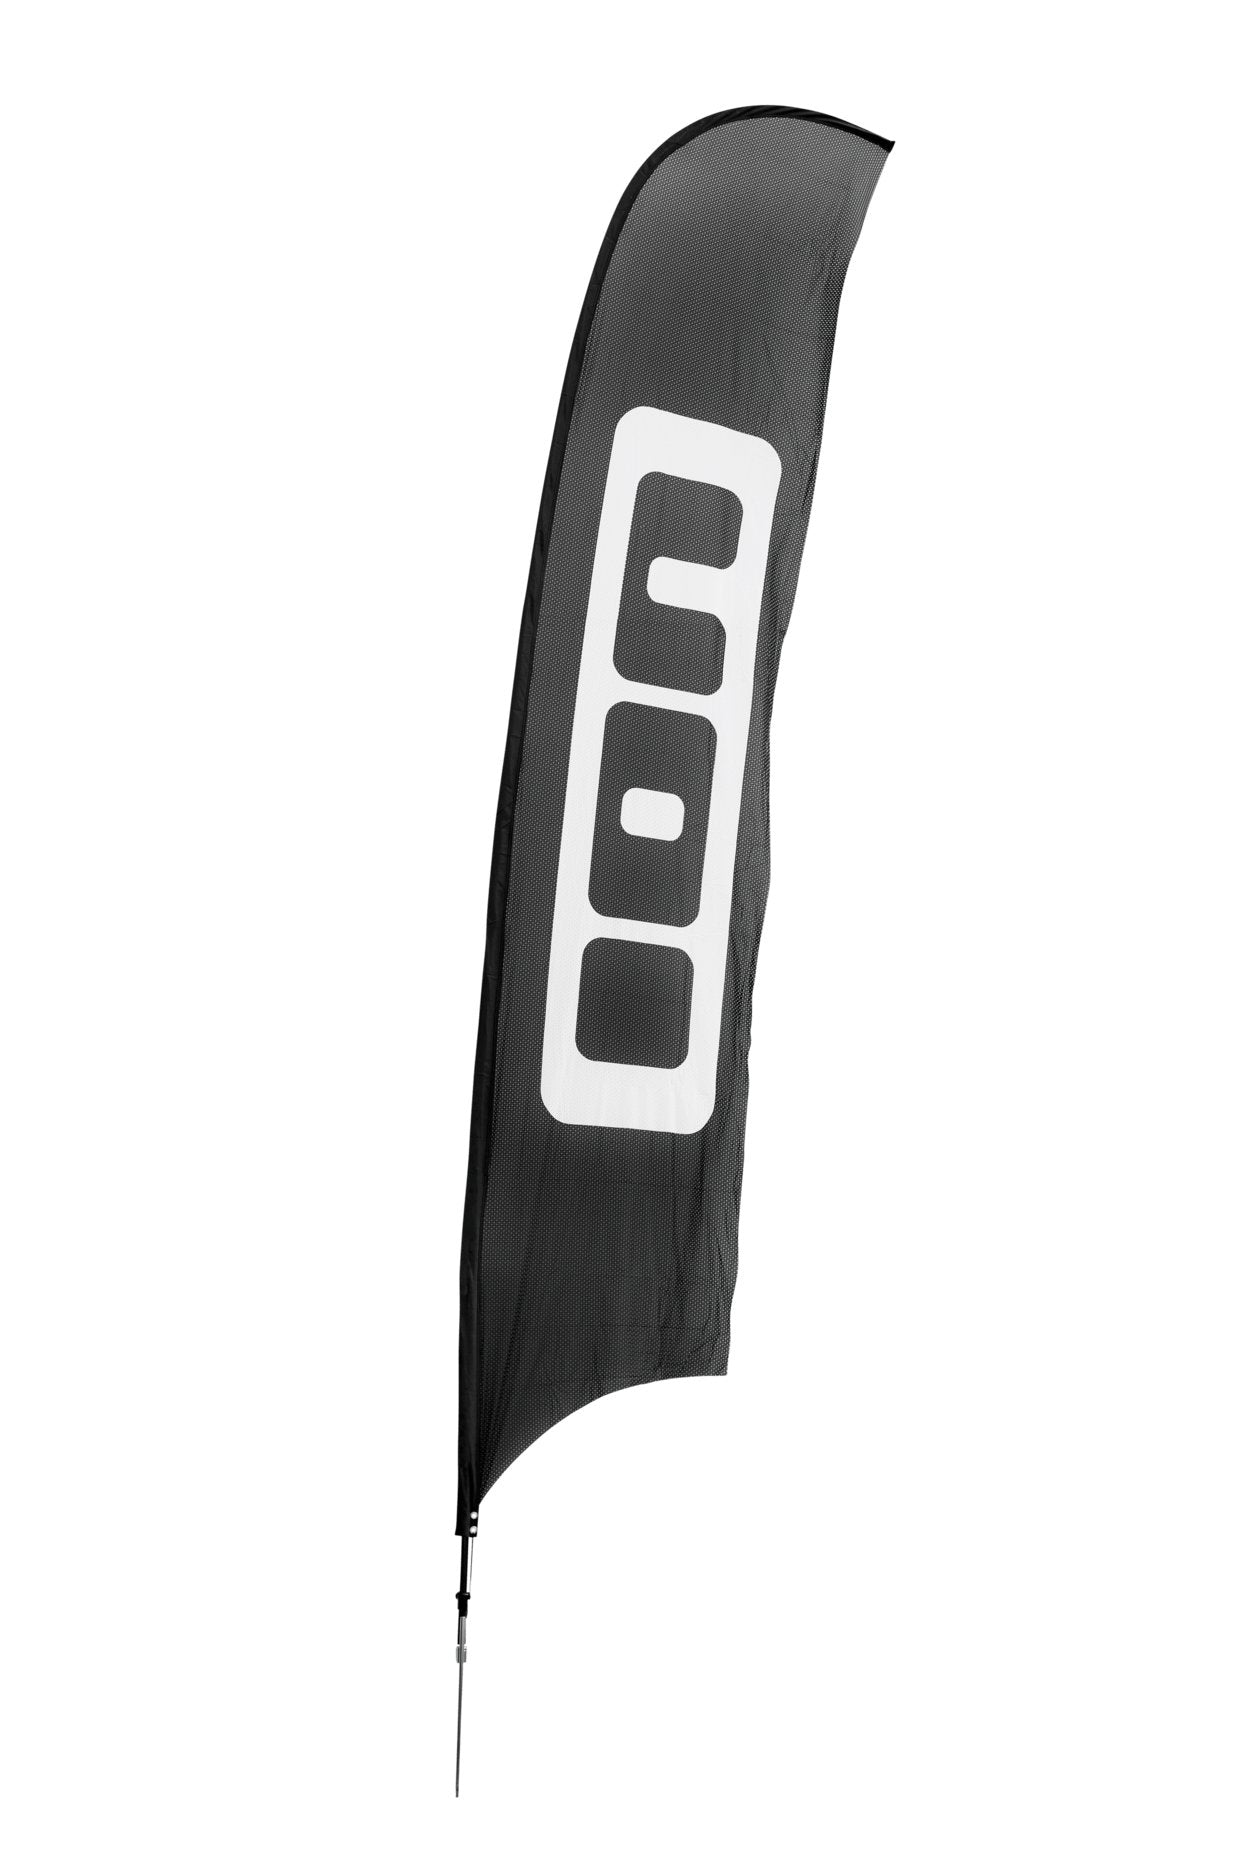 ION Beachflag w/o Pole&Foot 2024 - Worthing Watersports - 9008415783717 - Promo - ION Water